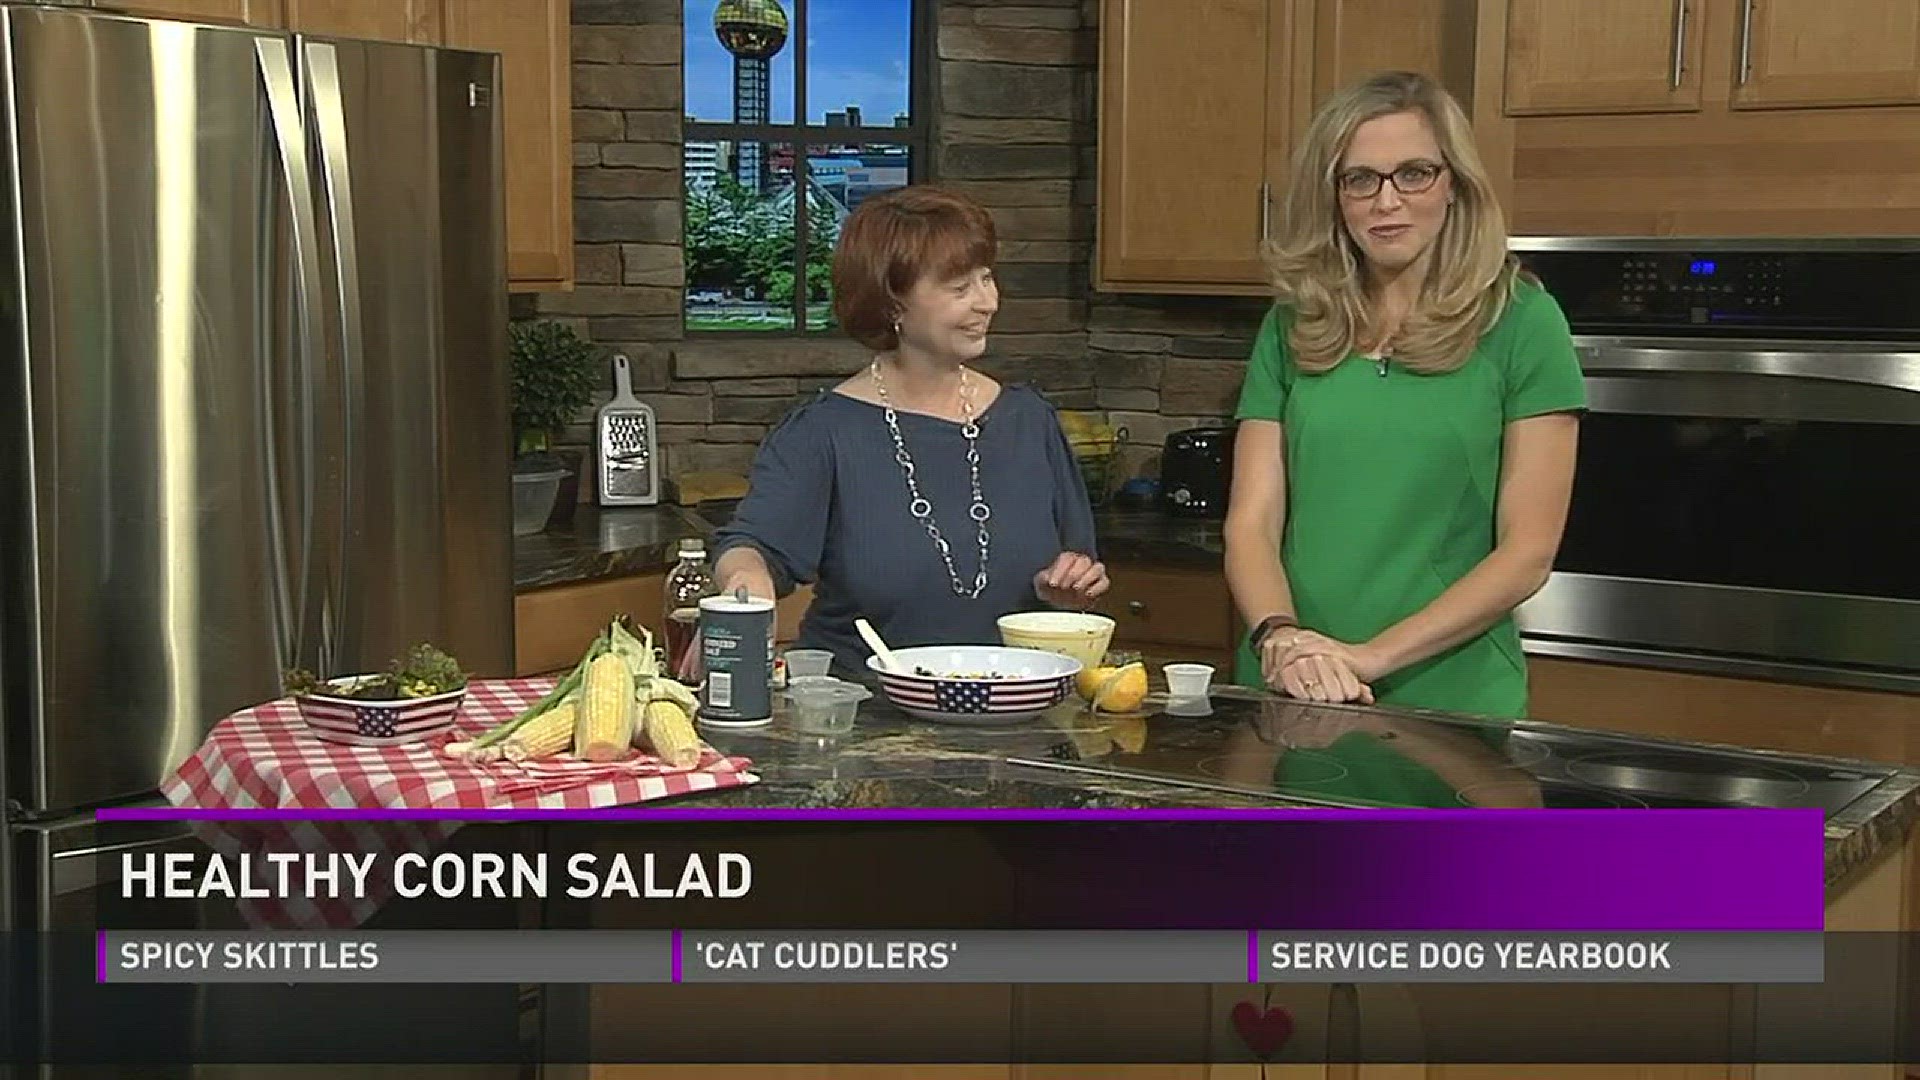 May 25, 2017: Mendy Cobb from UT Medical Center makes a corn salad packed with health benefits.